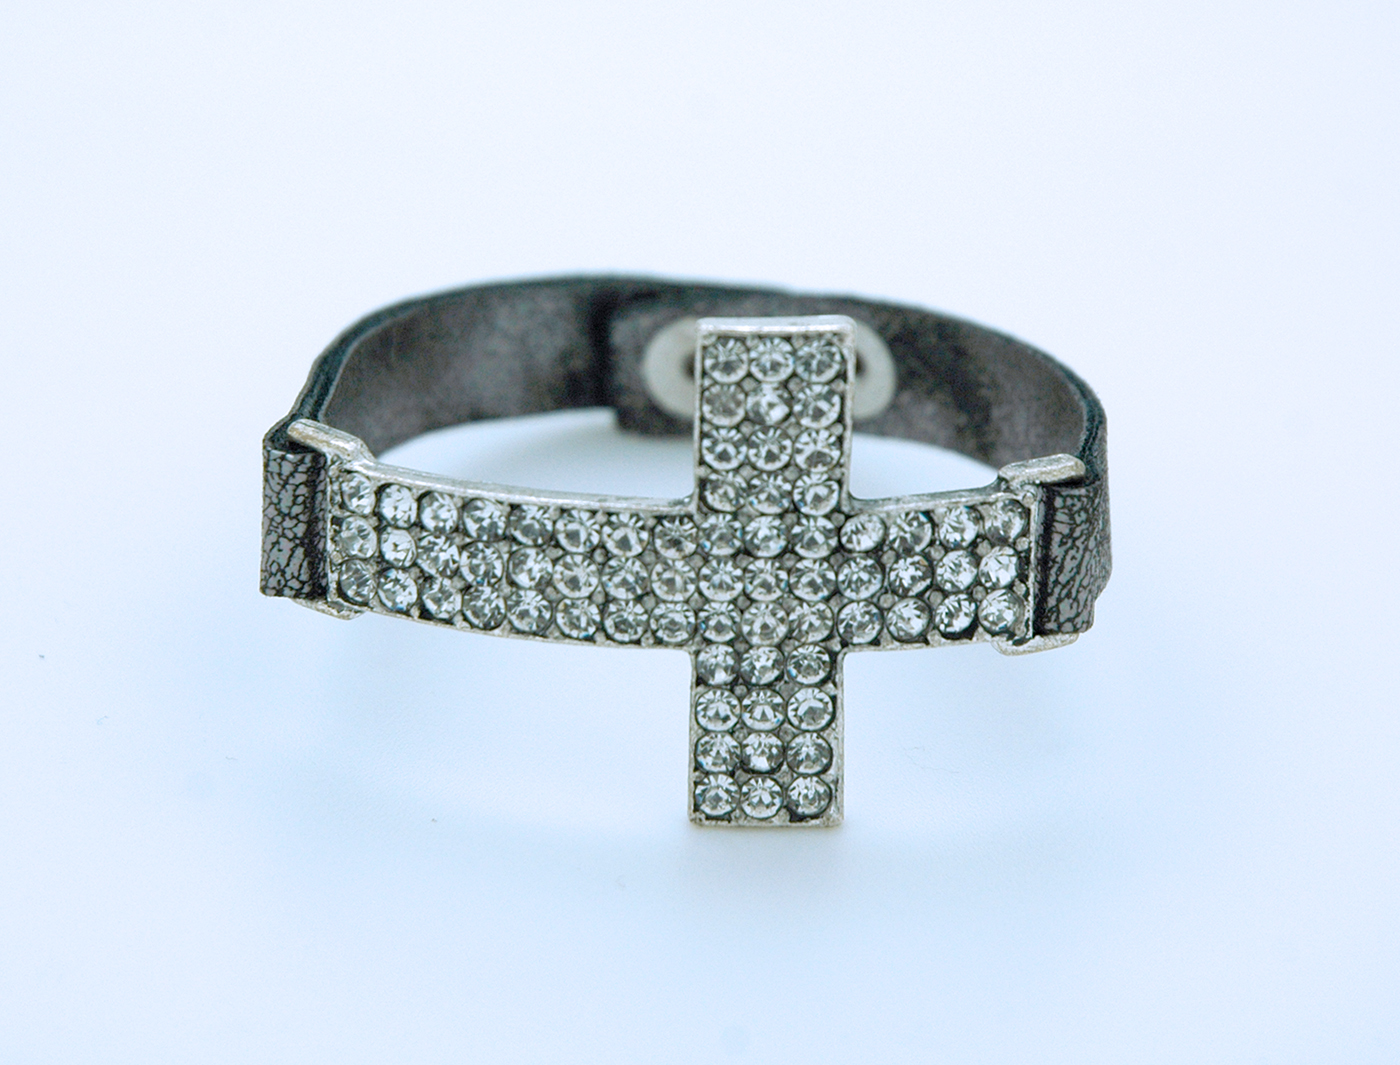 CU1025S - Large Crystal Cross Bracelet on Silver, Faux Leather Band